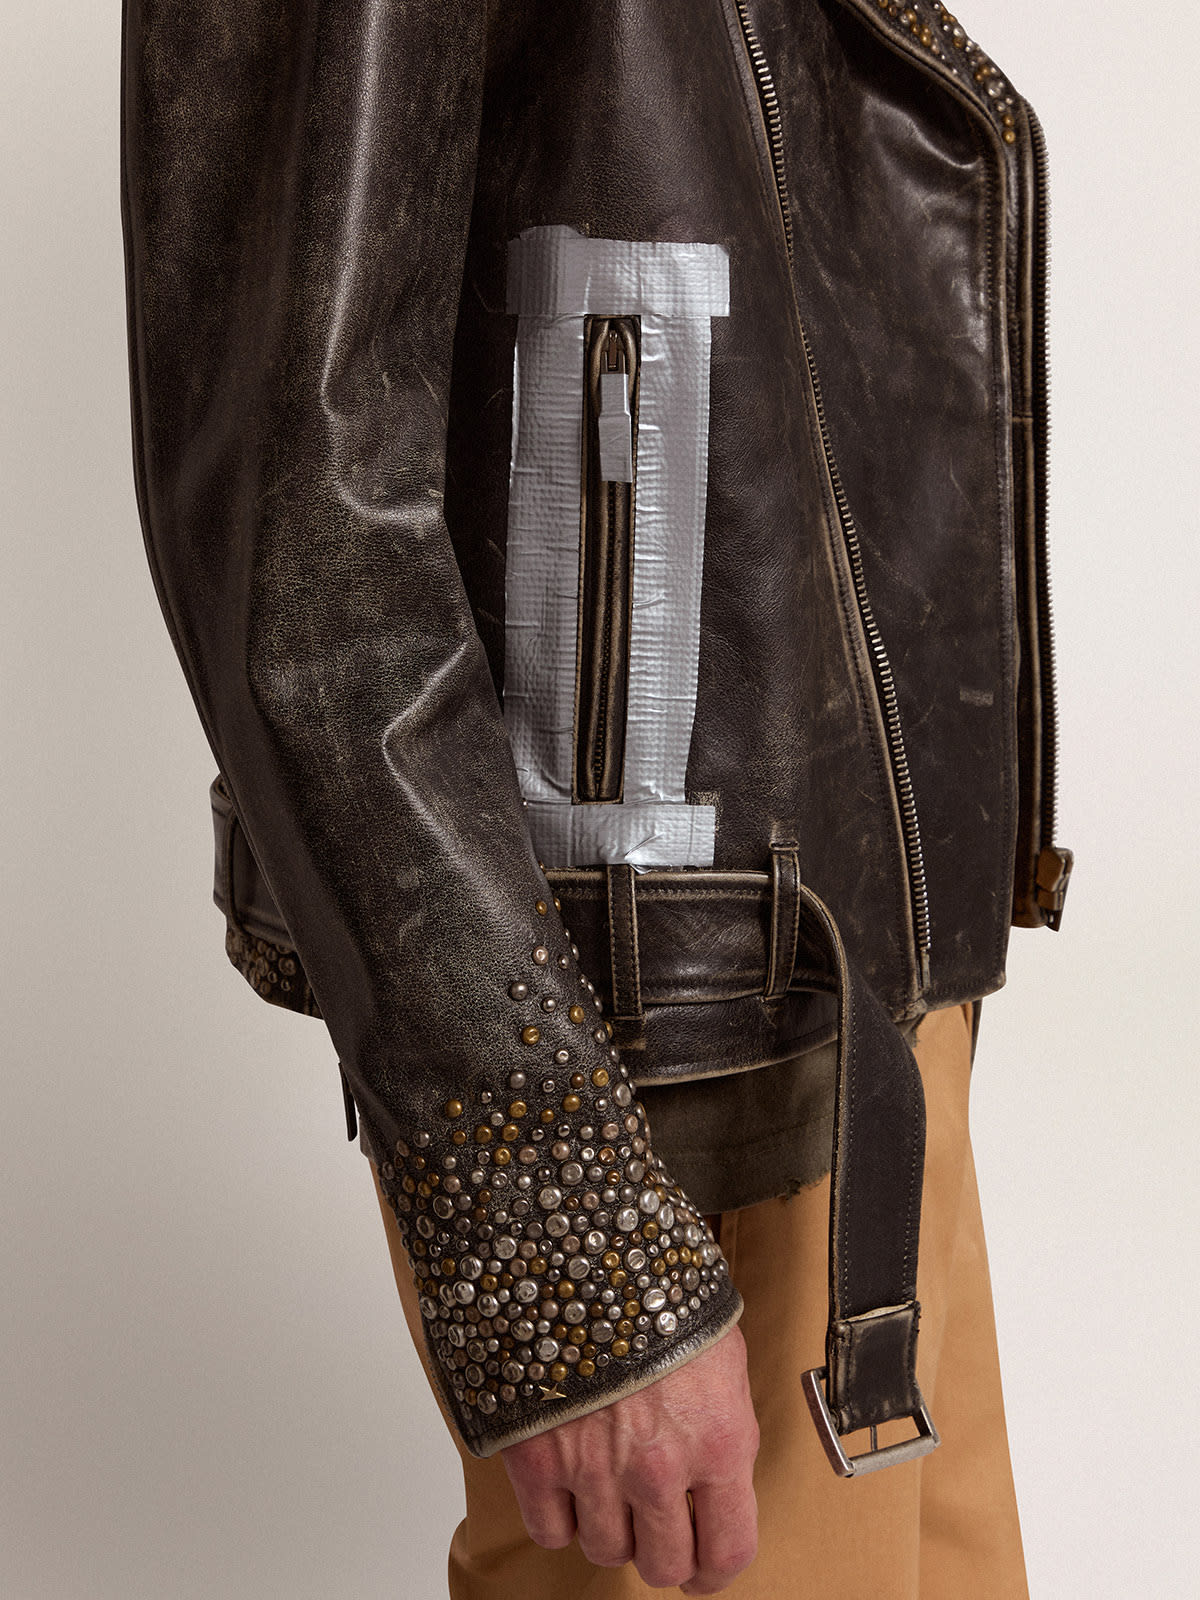 Golden Goose - Leather biker jacket with hammered studs and adhesive tape in 